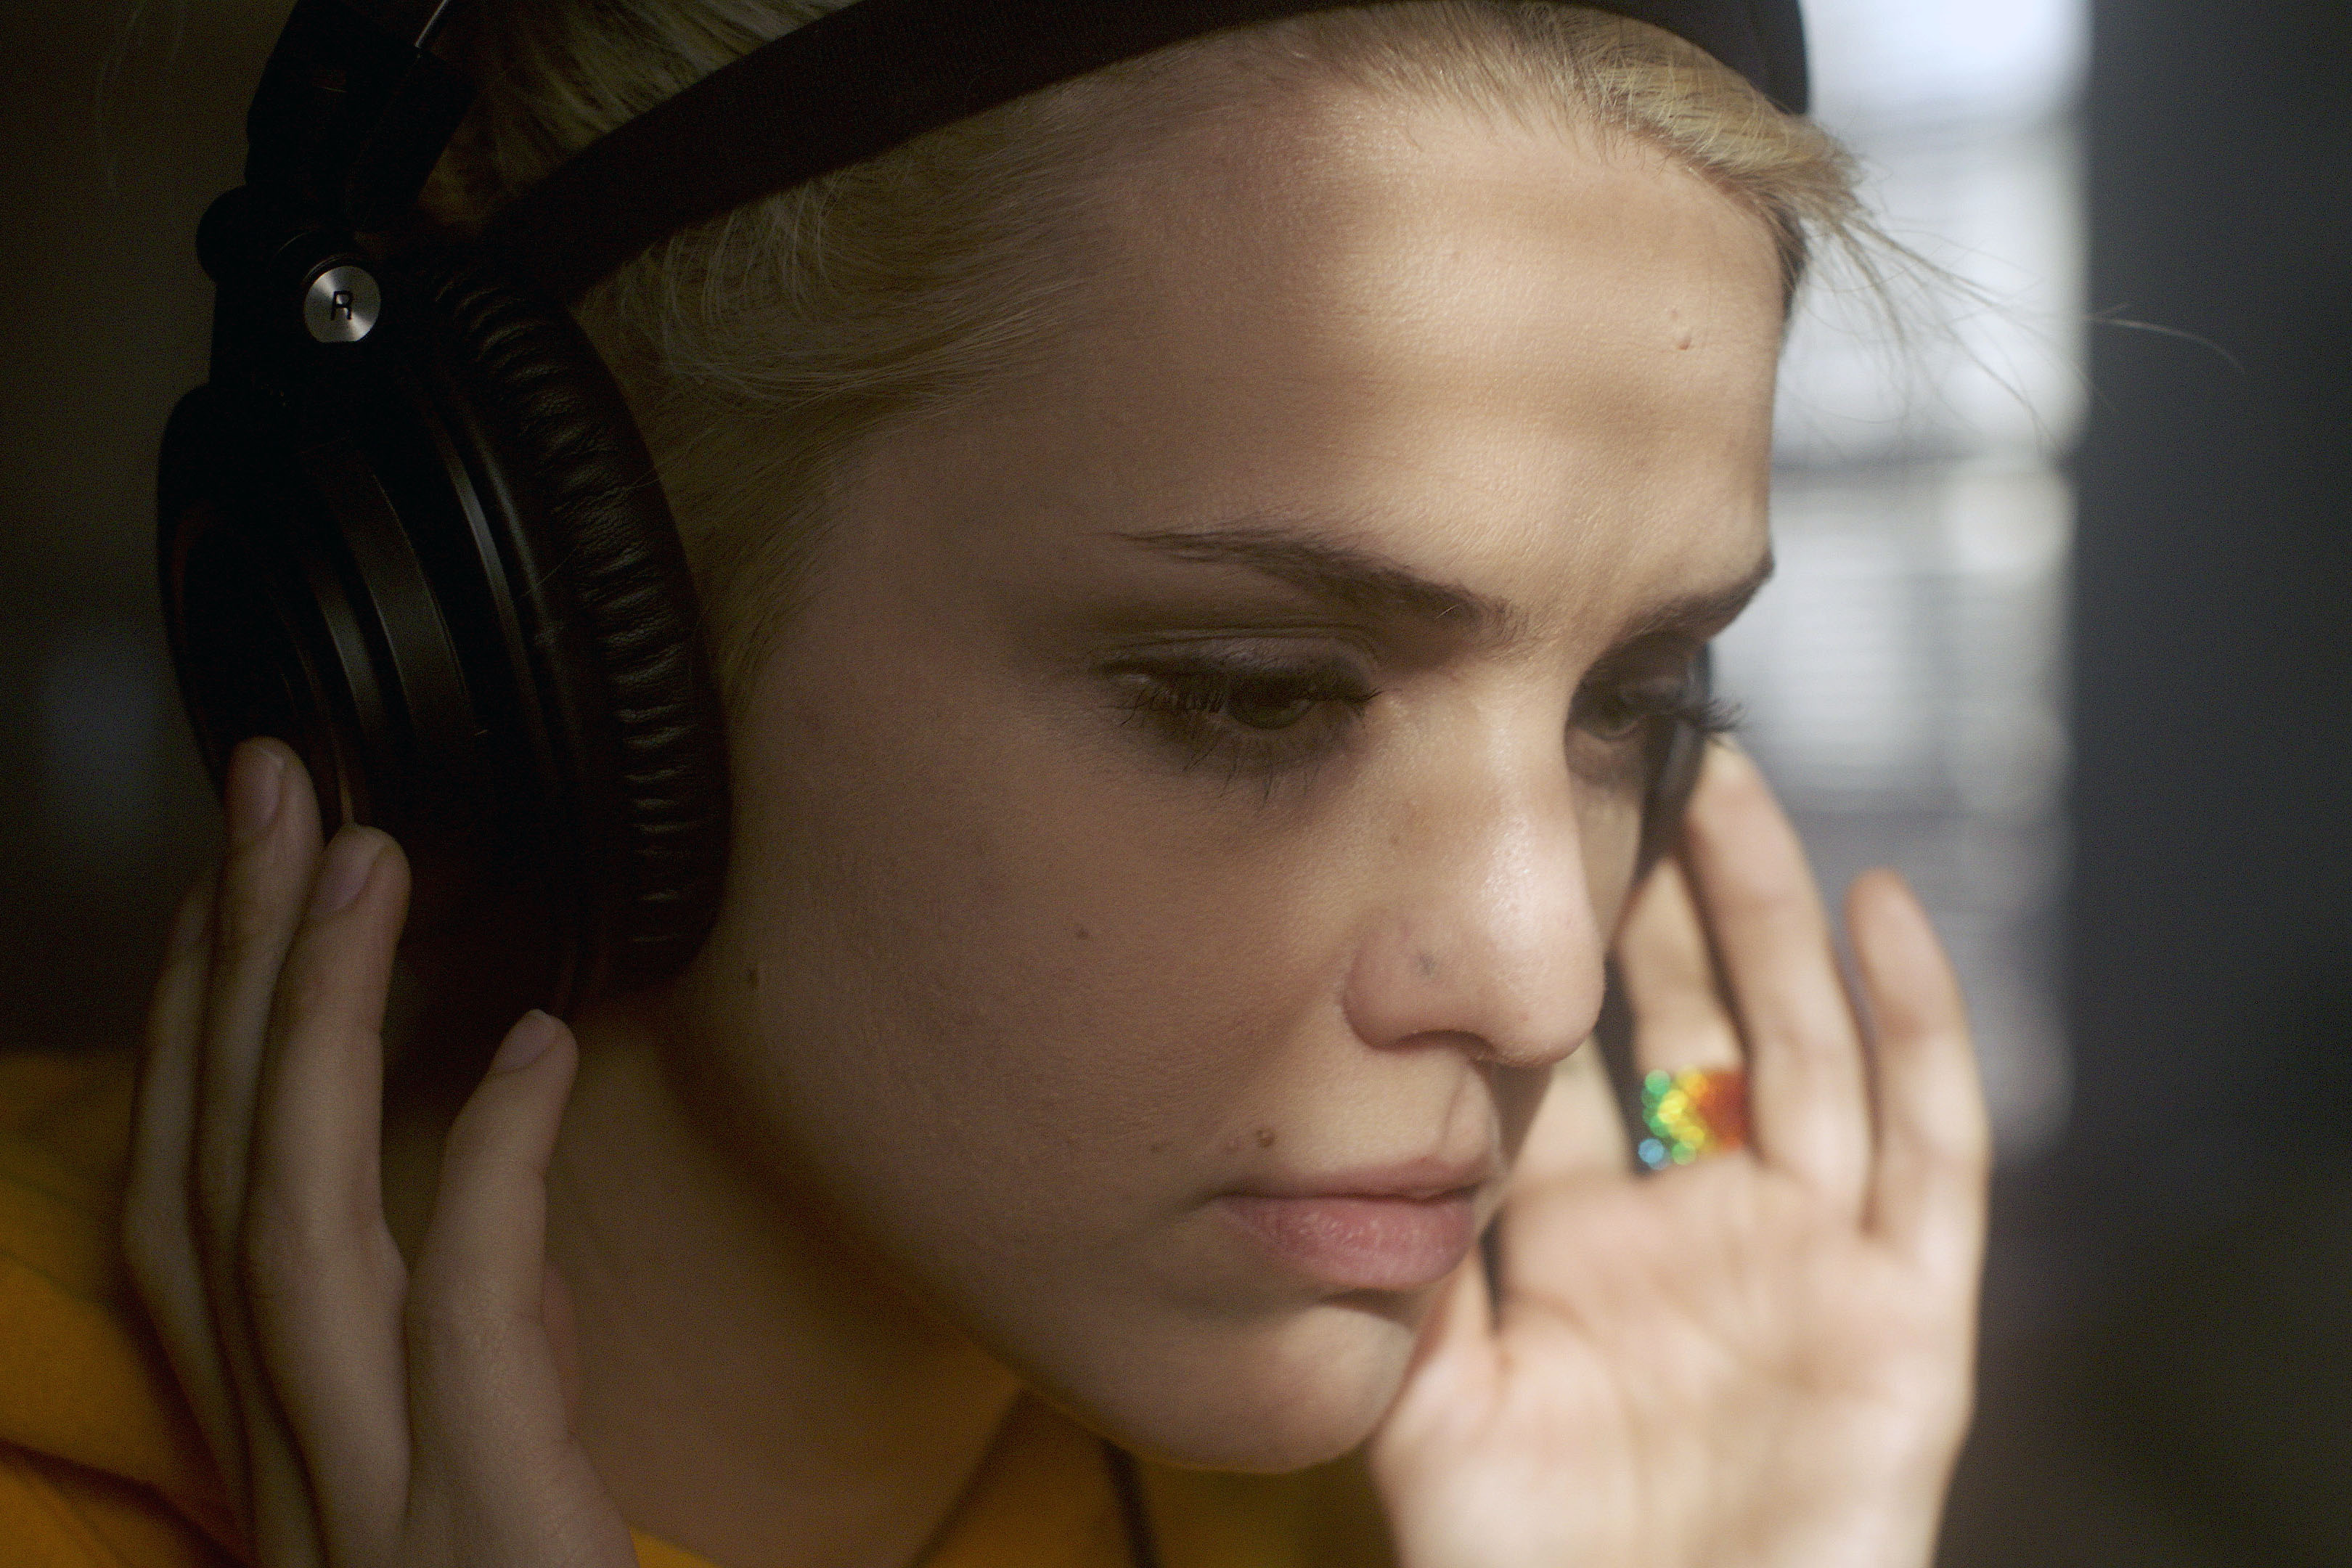 Actress Emily Sweet listens to music in the film Palace (Photo courtesy of One County Film Company)